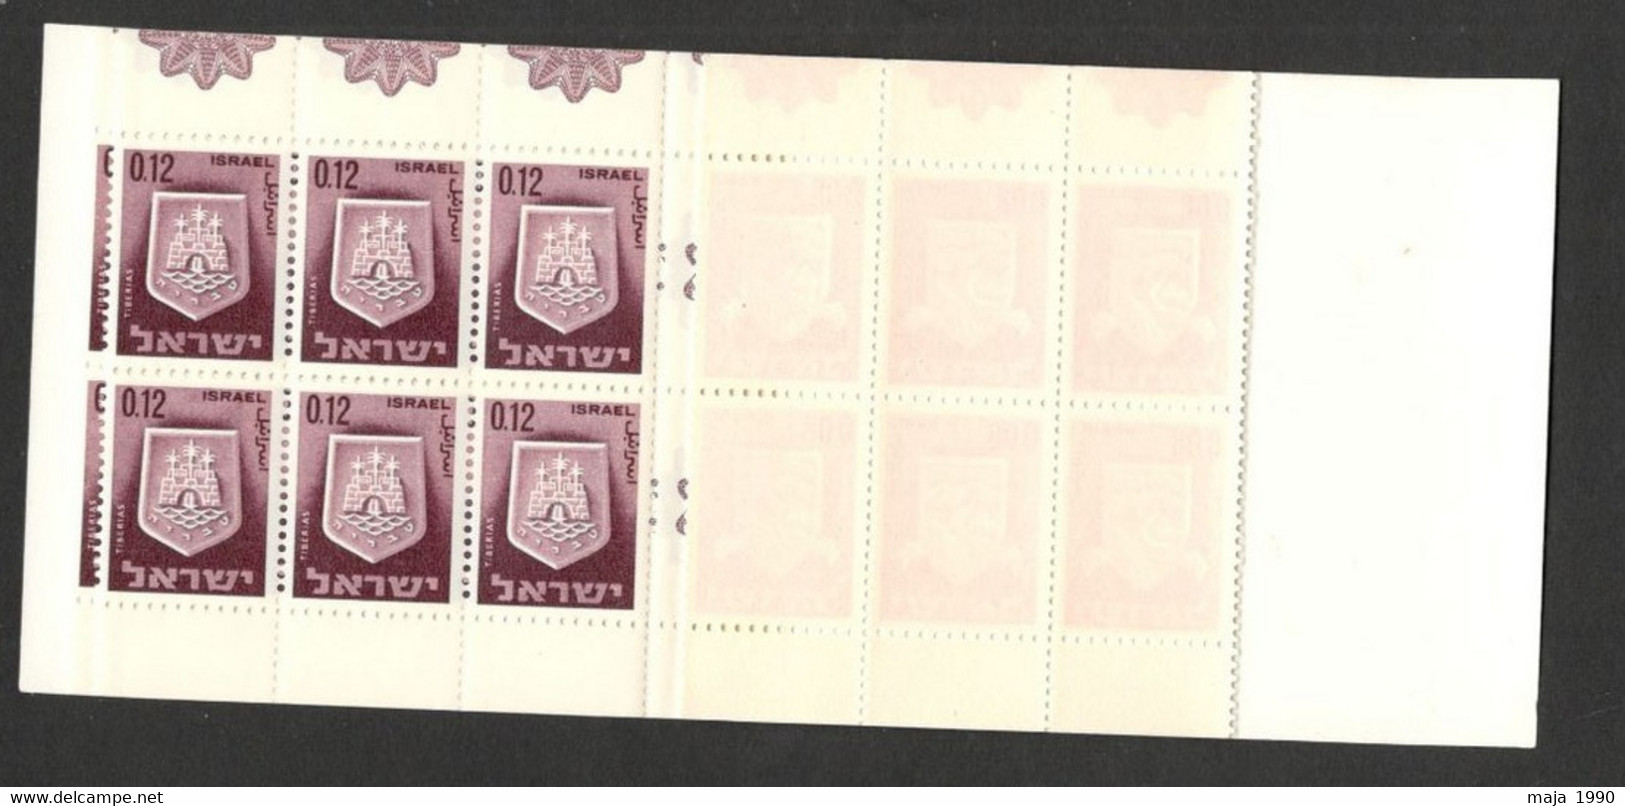 ISRAEL - MNH BOOKLET - DEFINITIVE STAMPS - 1965. - Cuadernillos